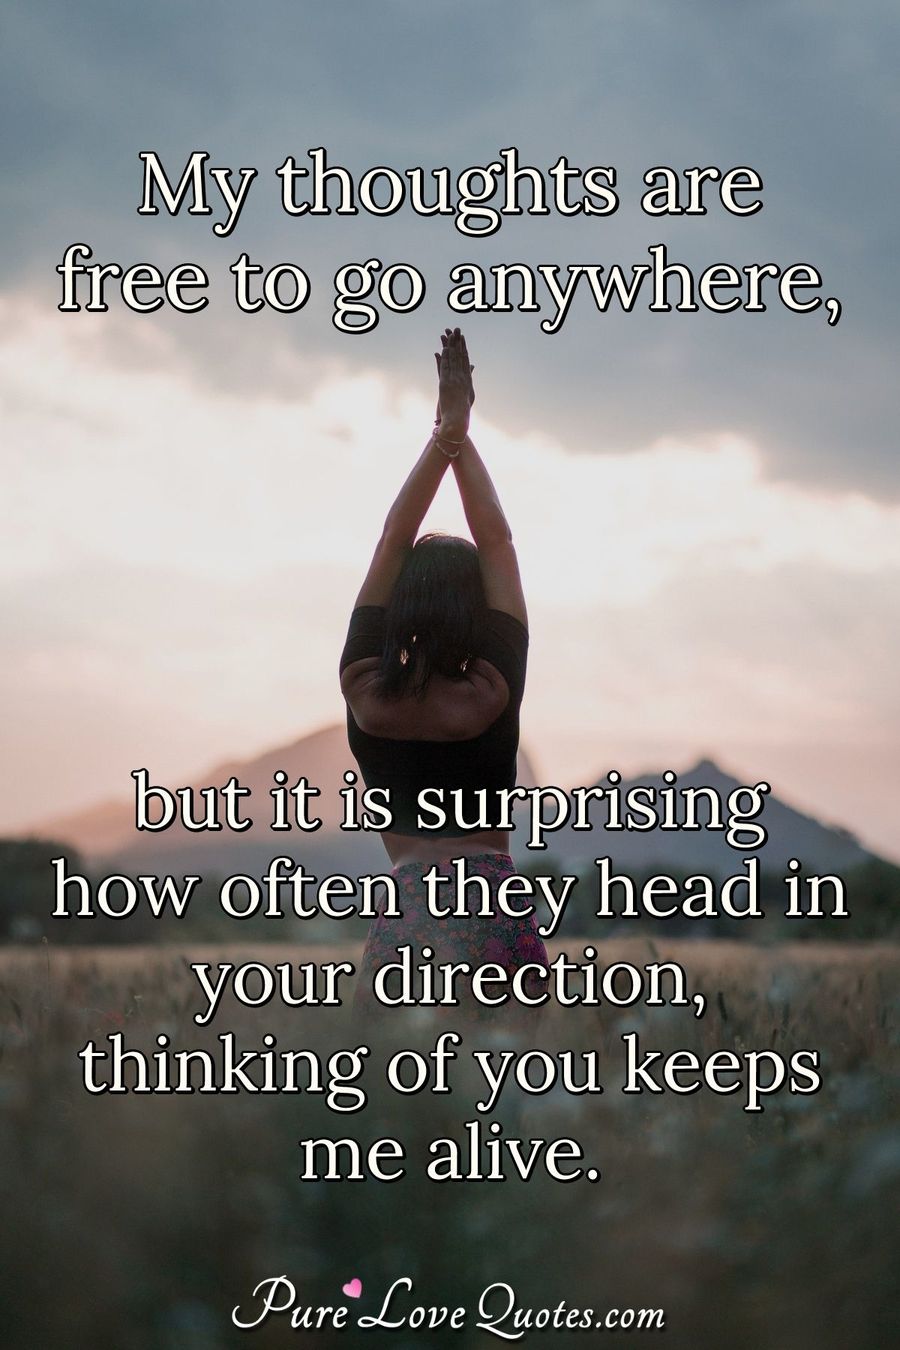 My thoughts are free to go anywhere, but it's surprising how often ...